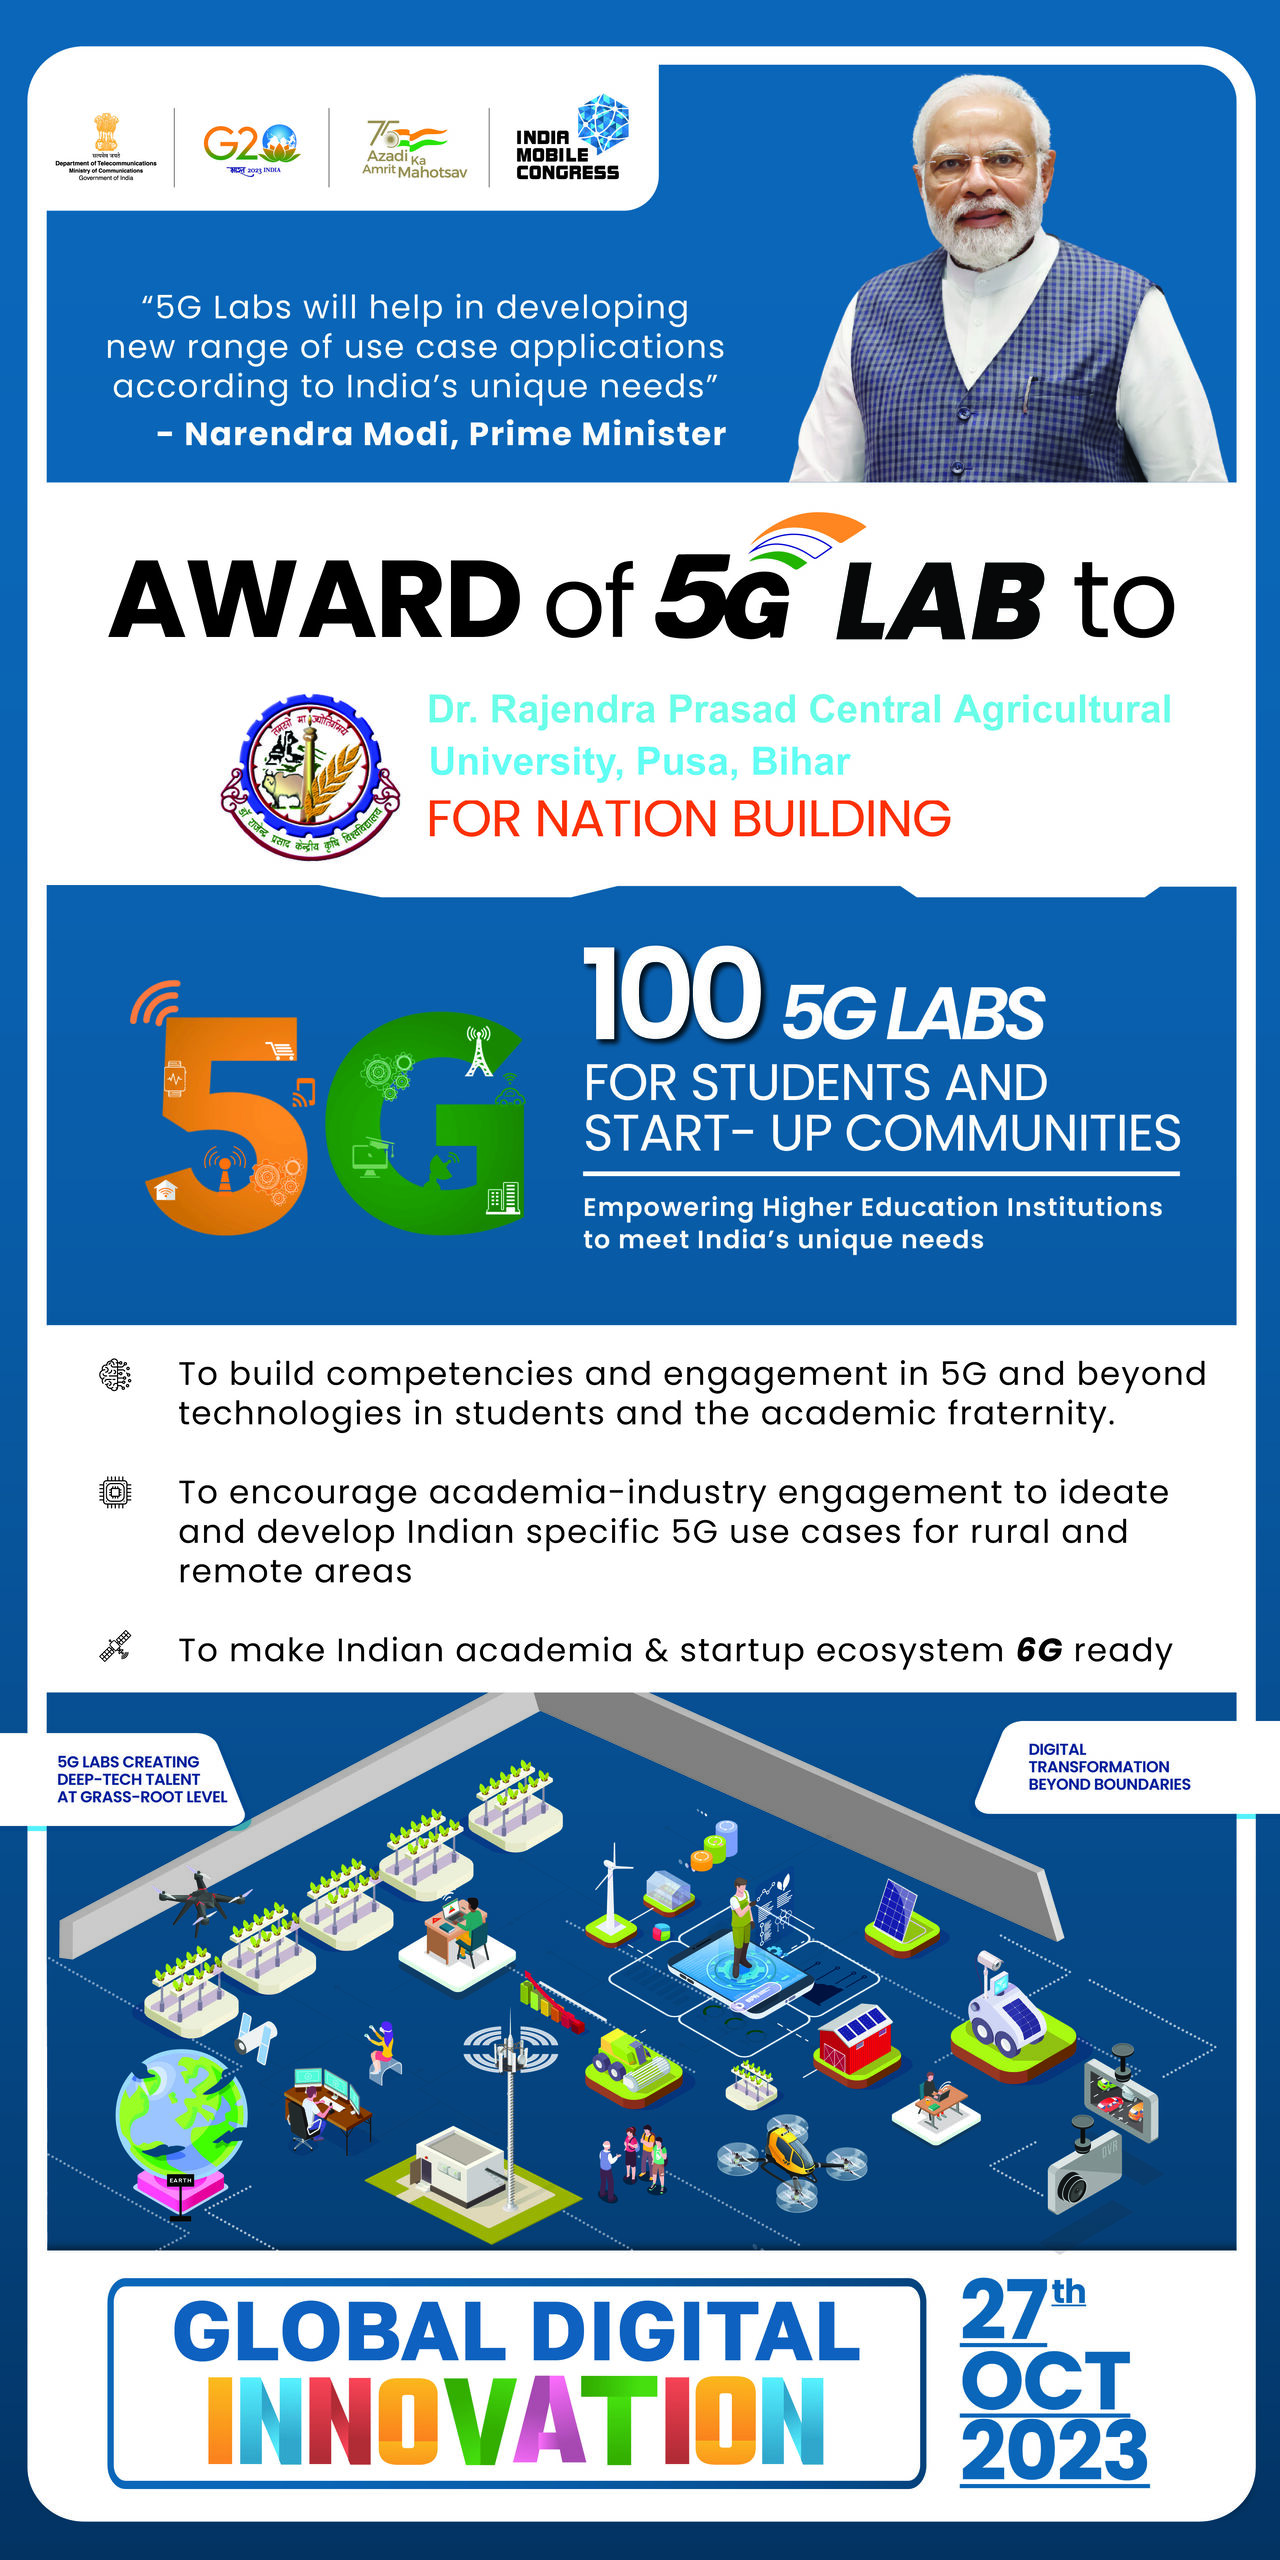 Dr. Rajendra Prasad Central Agricultural University Joins Elite Ranks with Inclusion in India’s Top 100 5G Labs